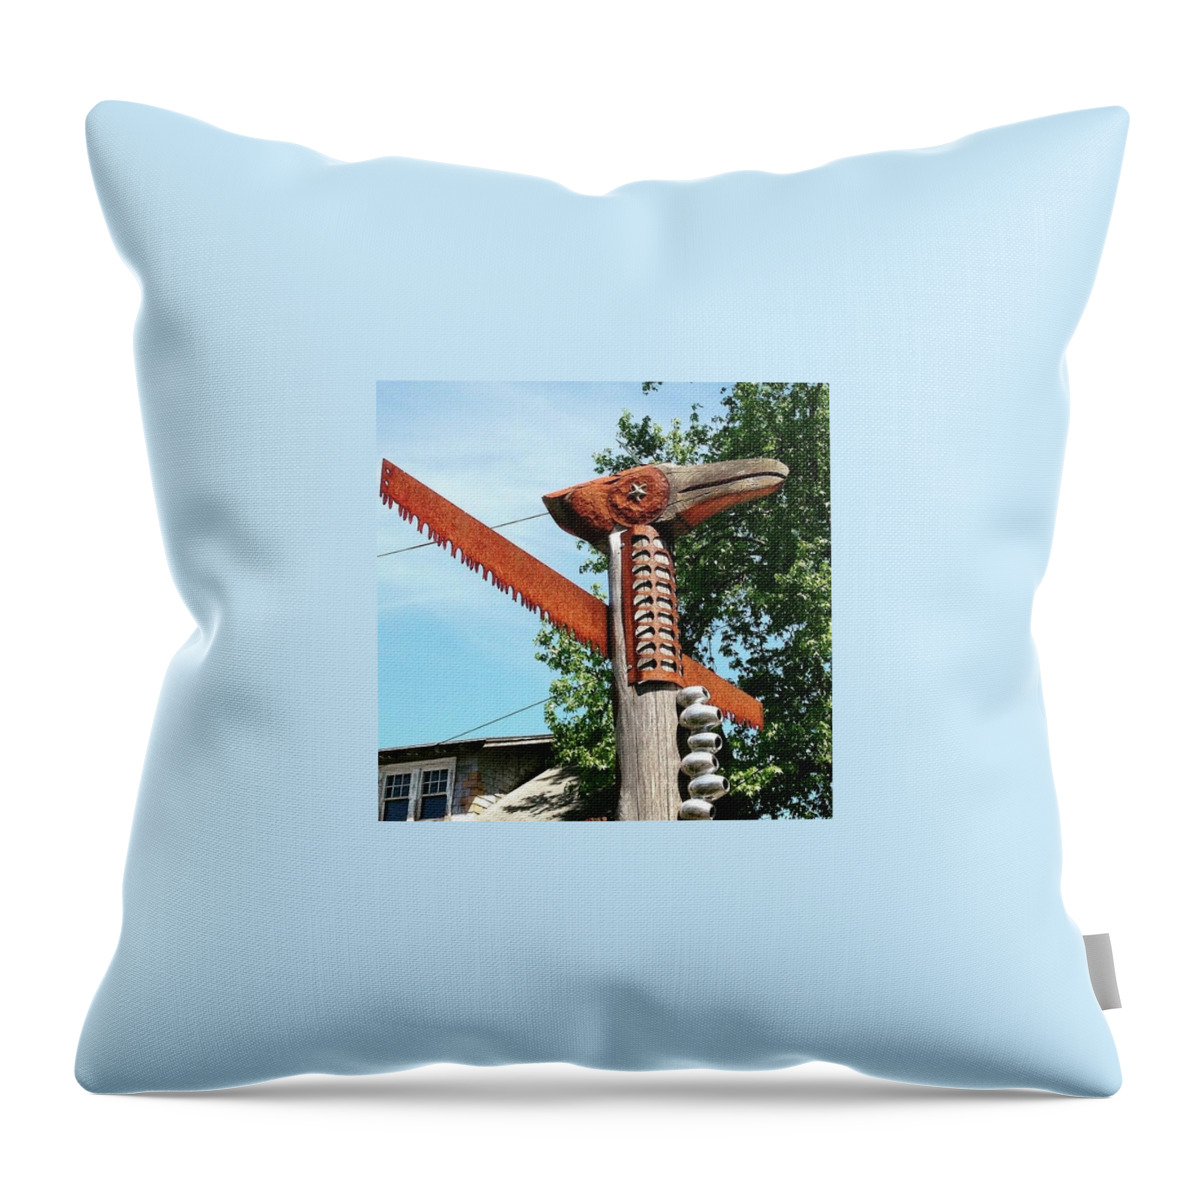 Blue Throw Pillow featuring the photograph Totem pole street art in Portland Oregon by Beate Weiss-krull